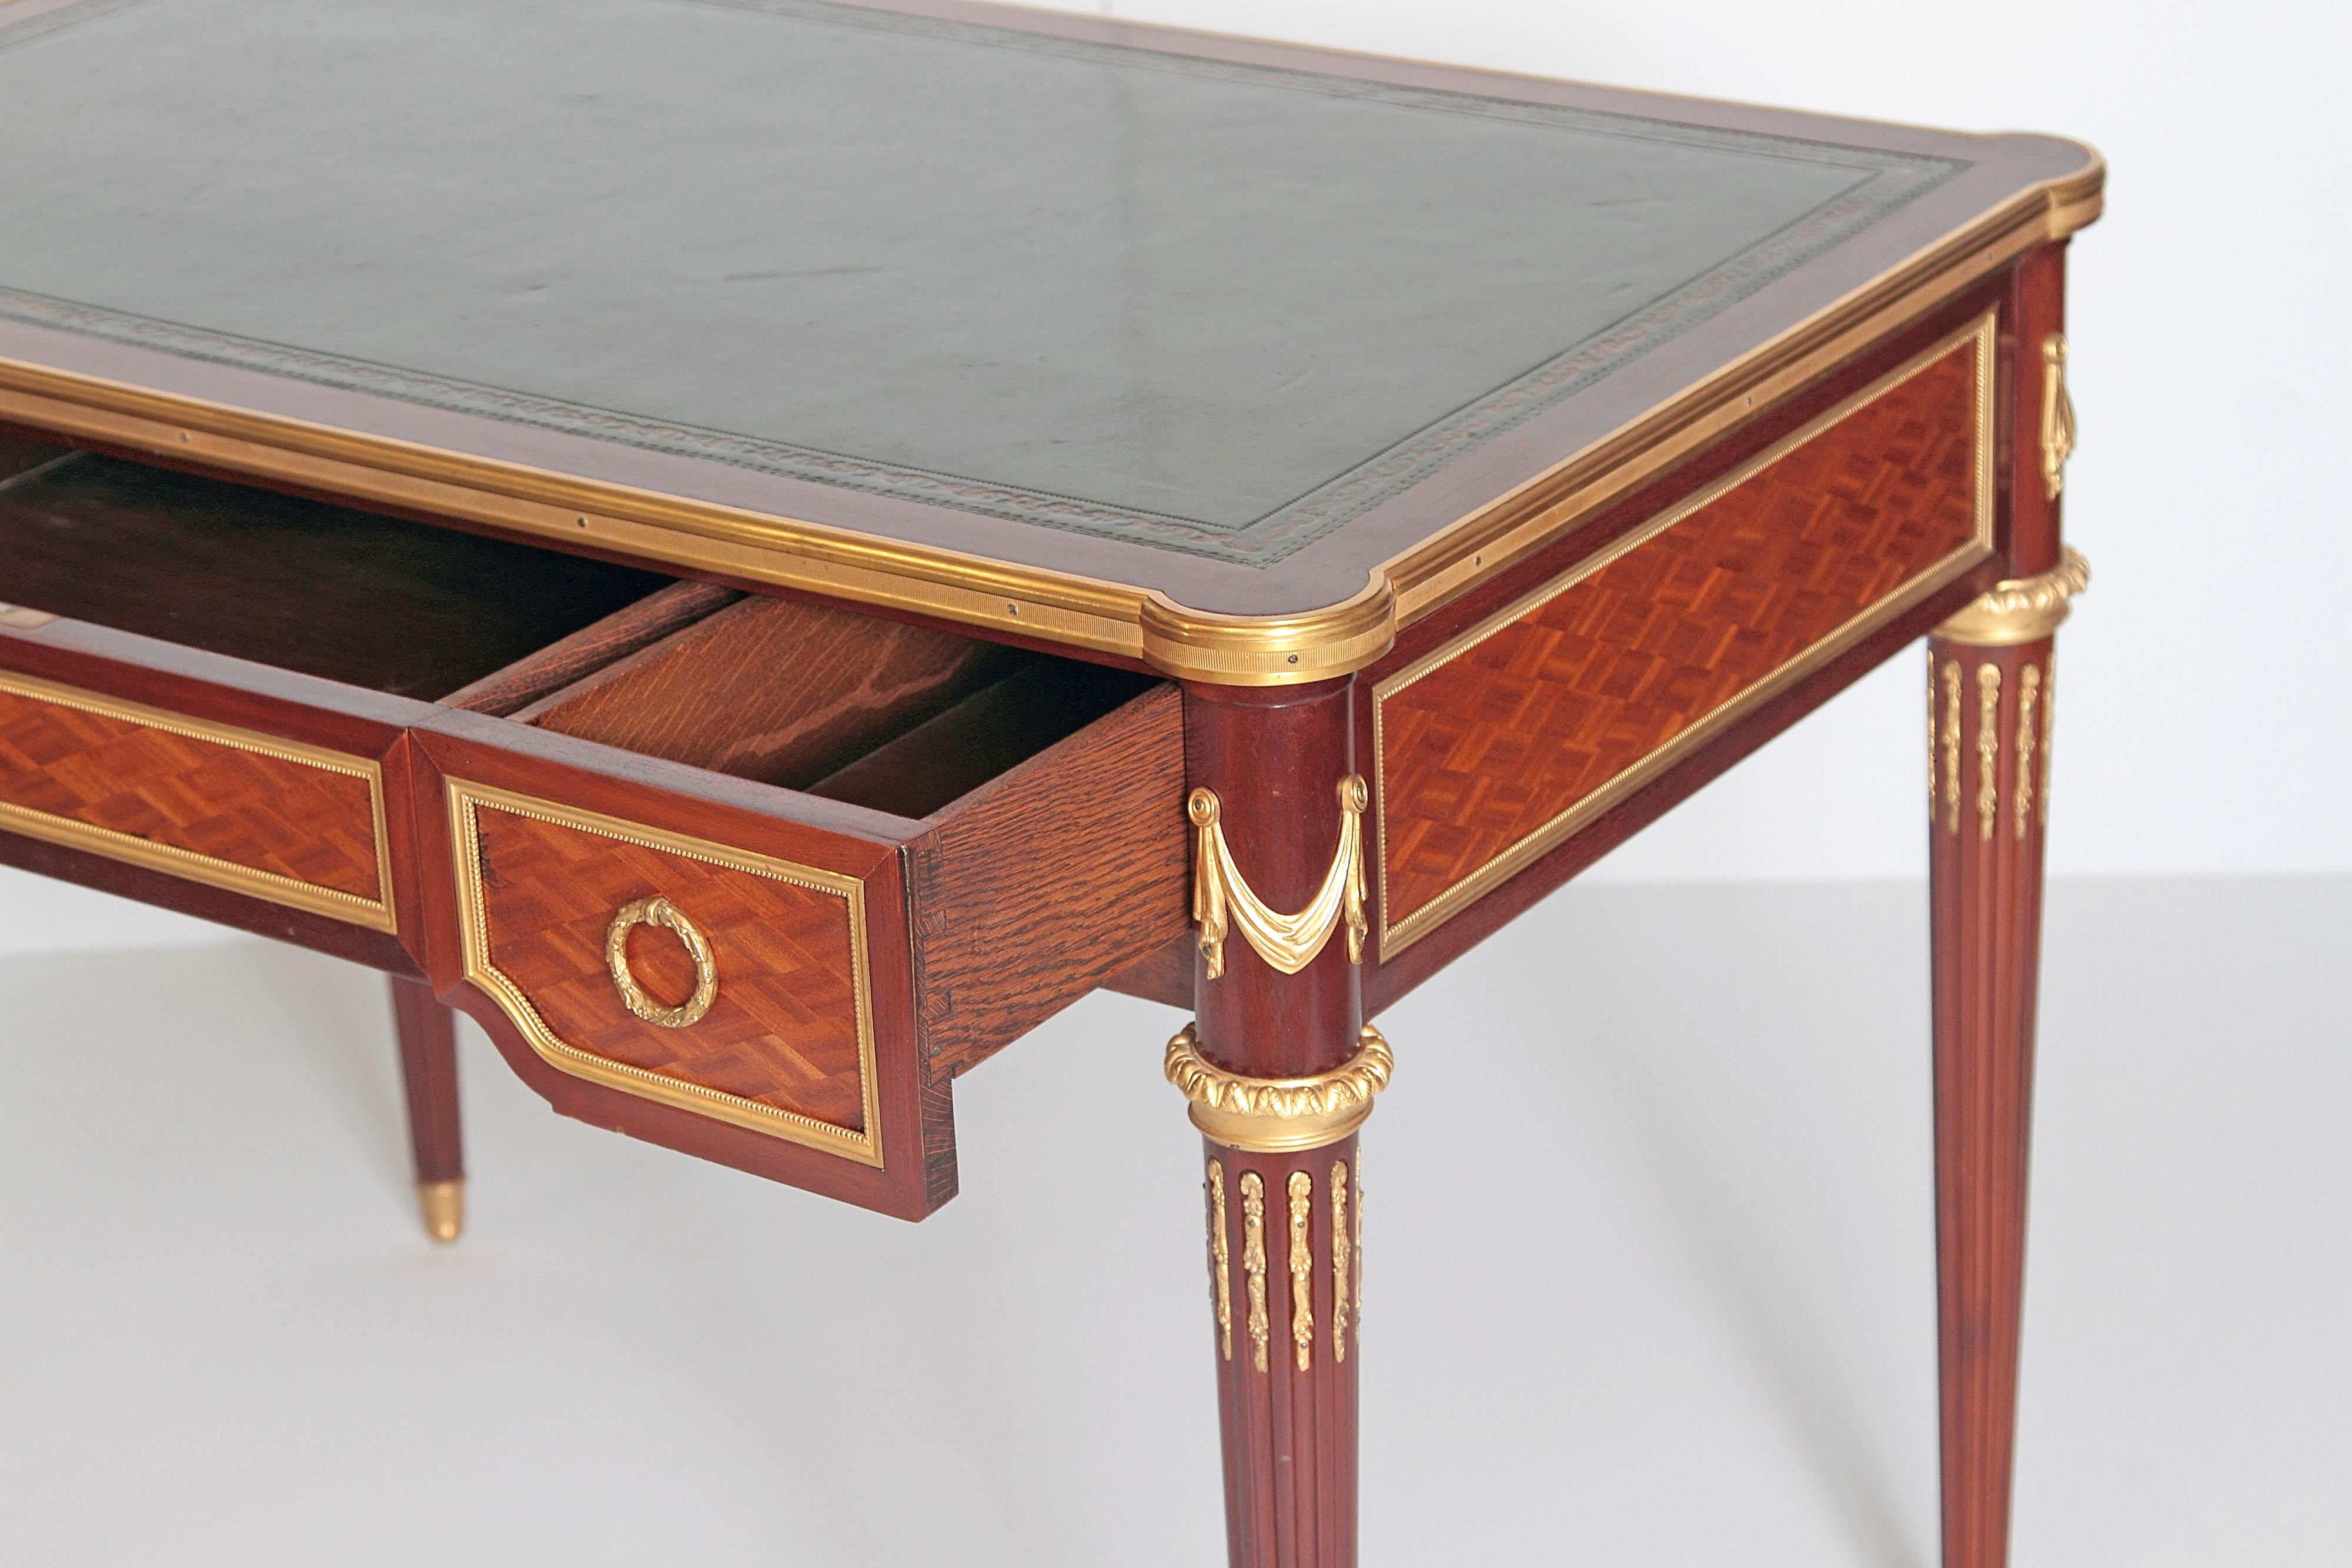 Early 19th Century Louis XVI Style Writing Table with Green Leather Top (Bronze)